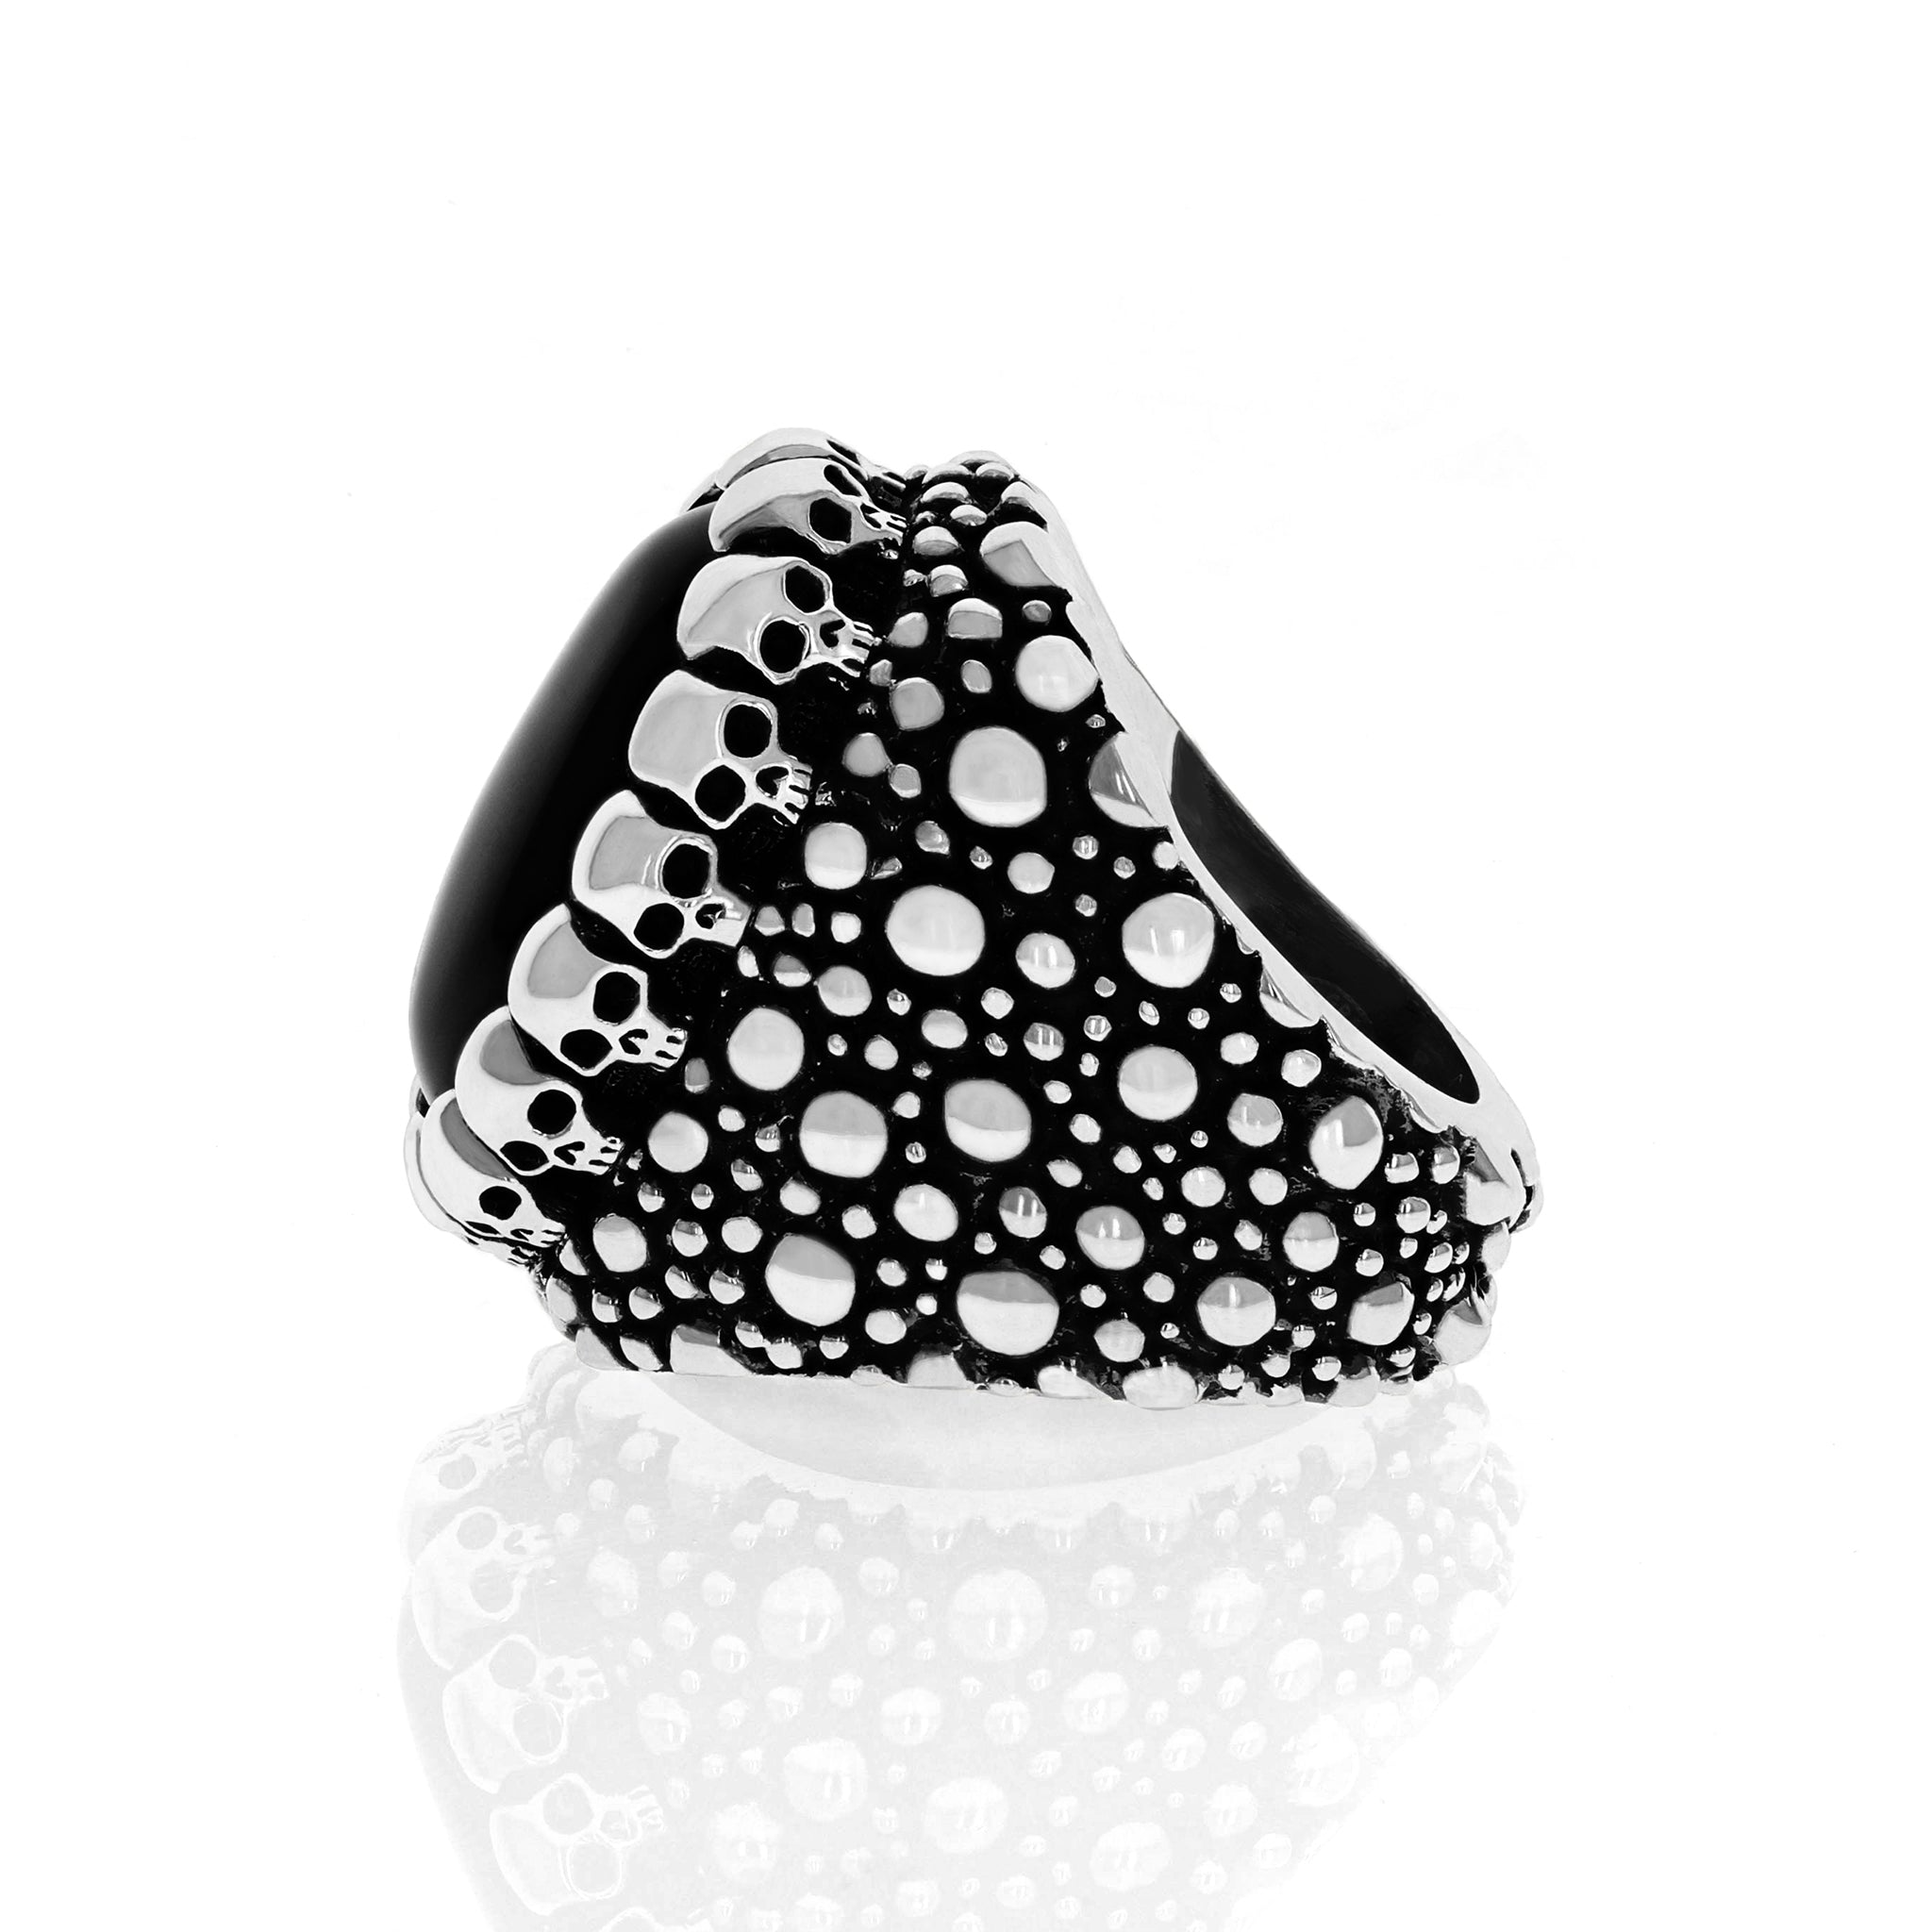 Sting Ray Texture Ring with Onyx Cabochon in Skull Bezel